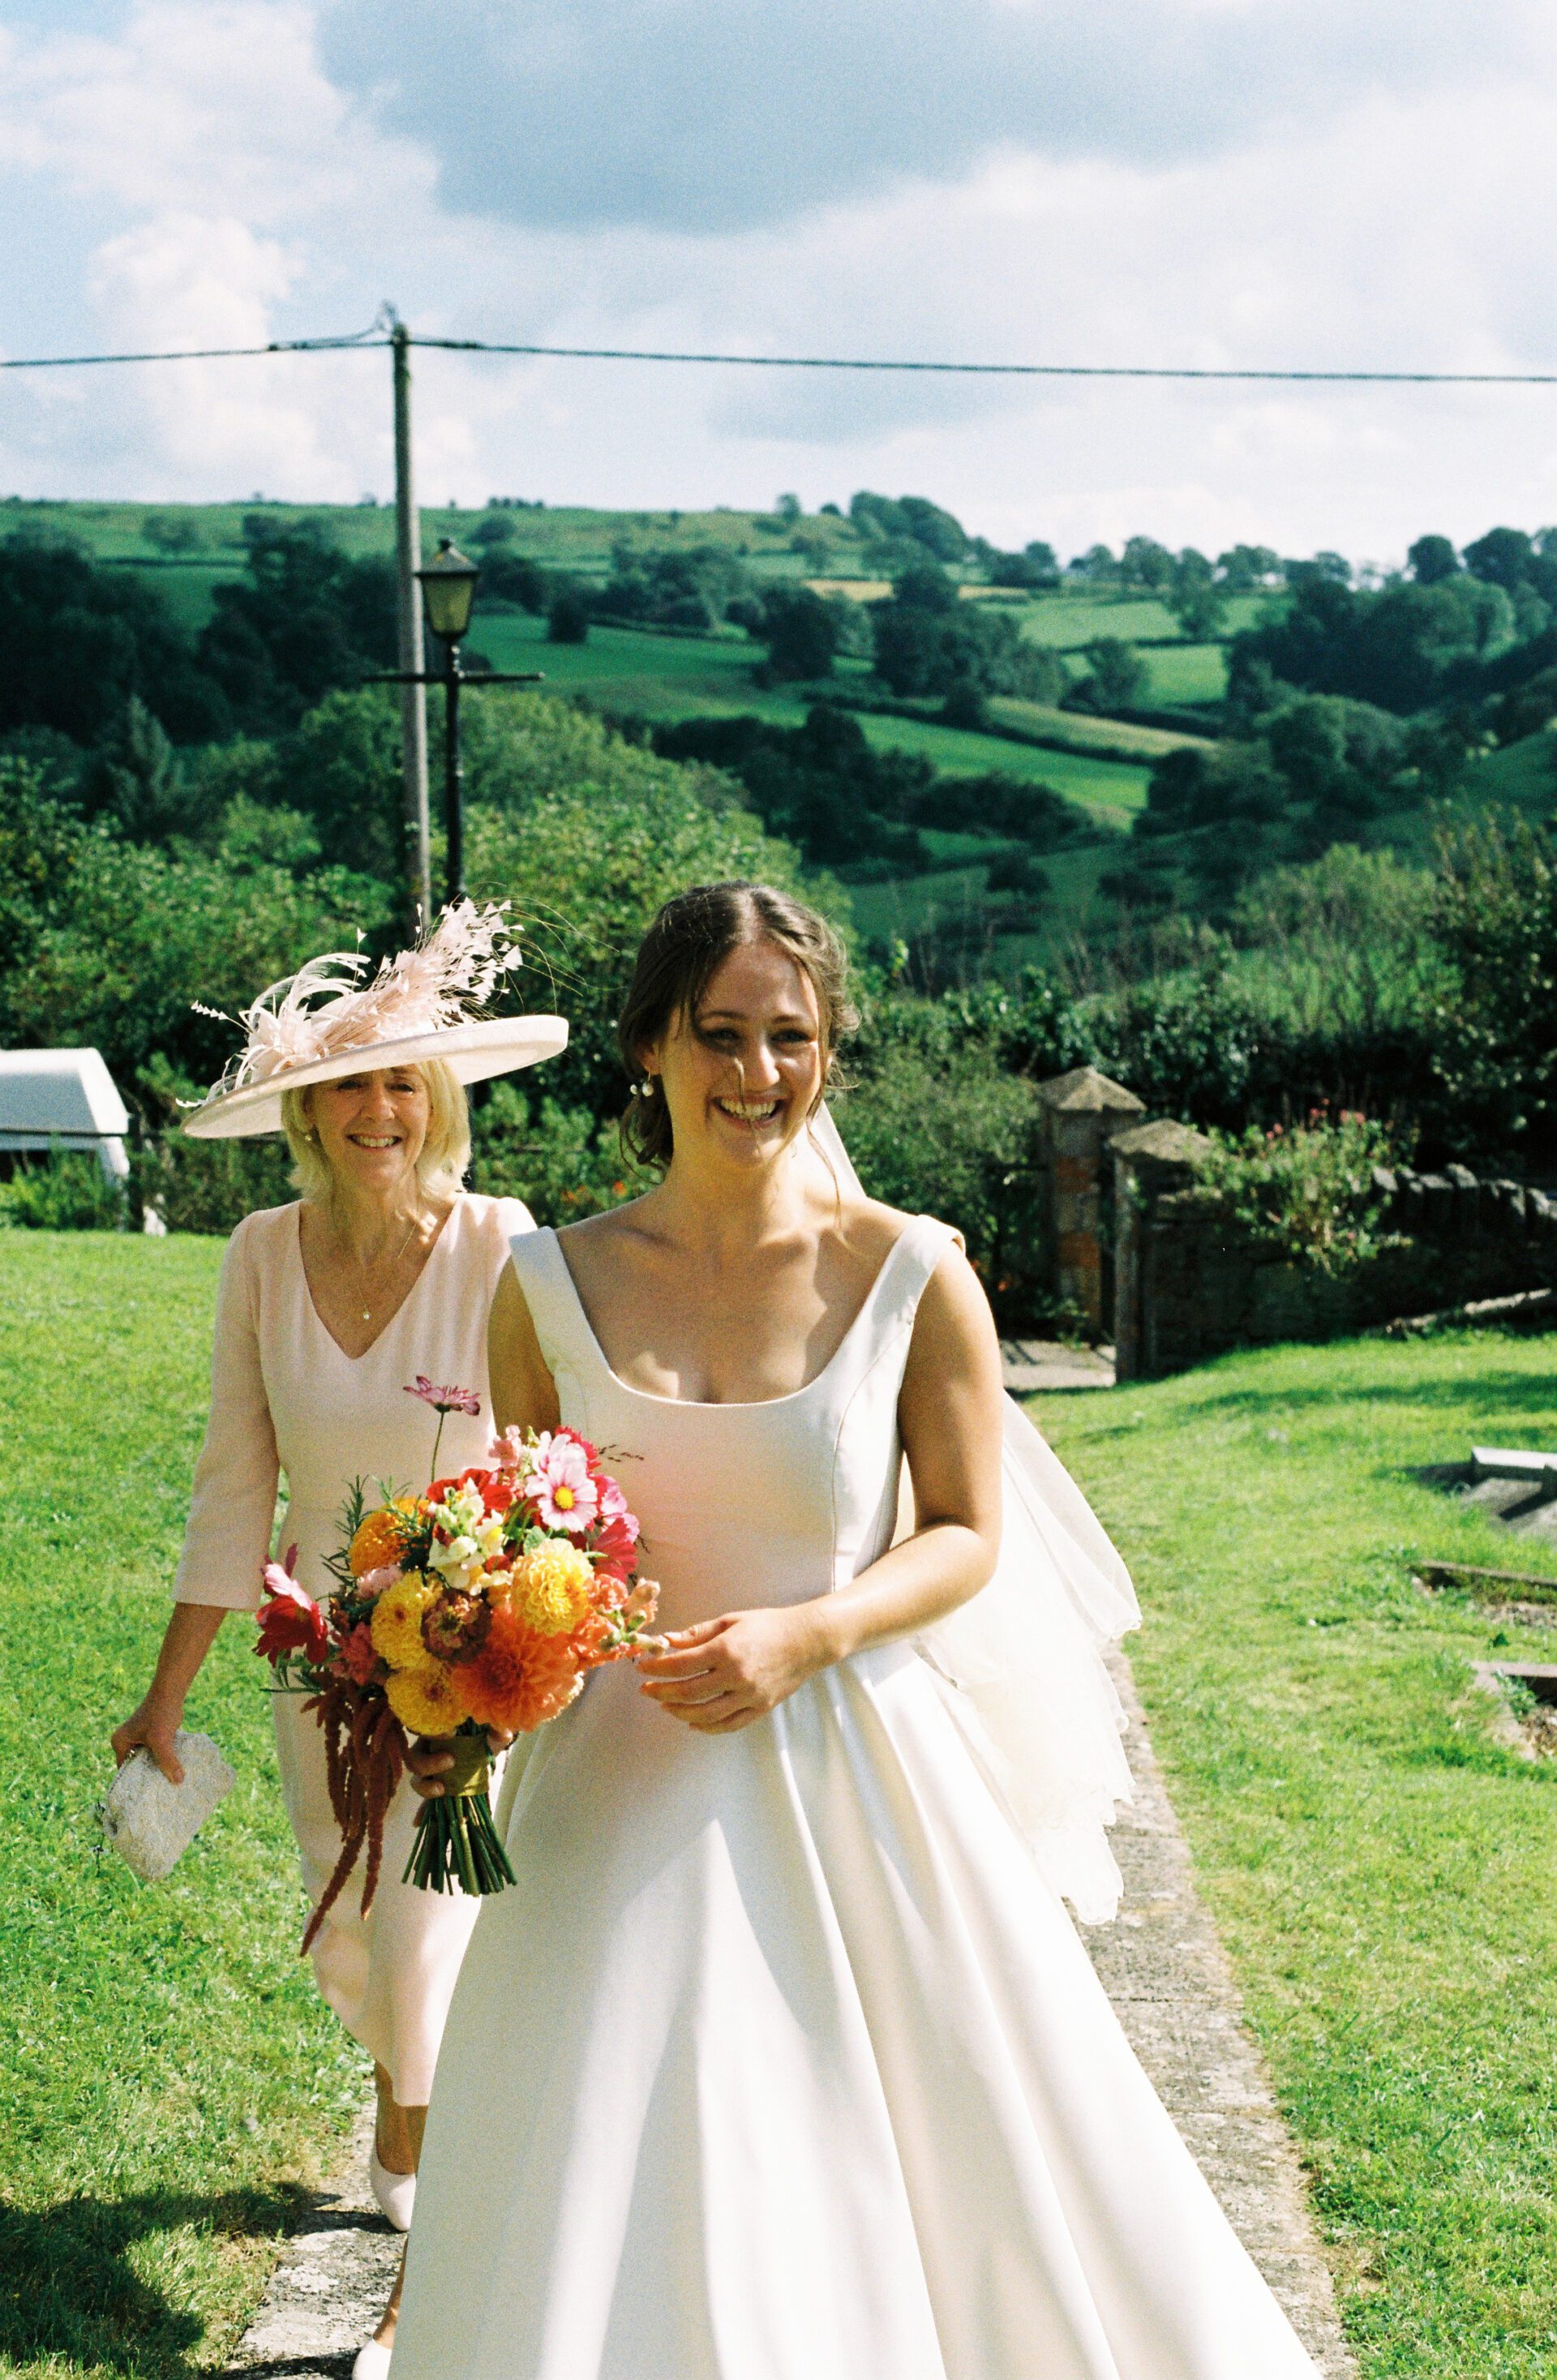 The bride arrives at the church with her mother captured on 35mm